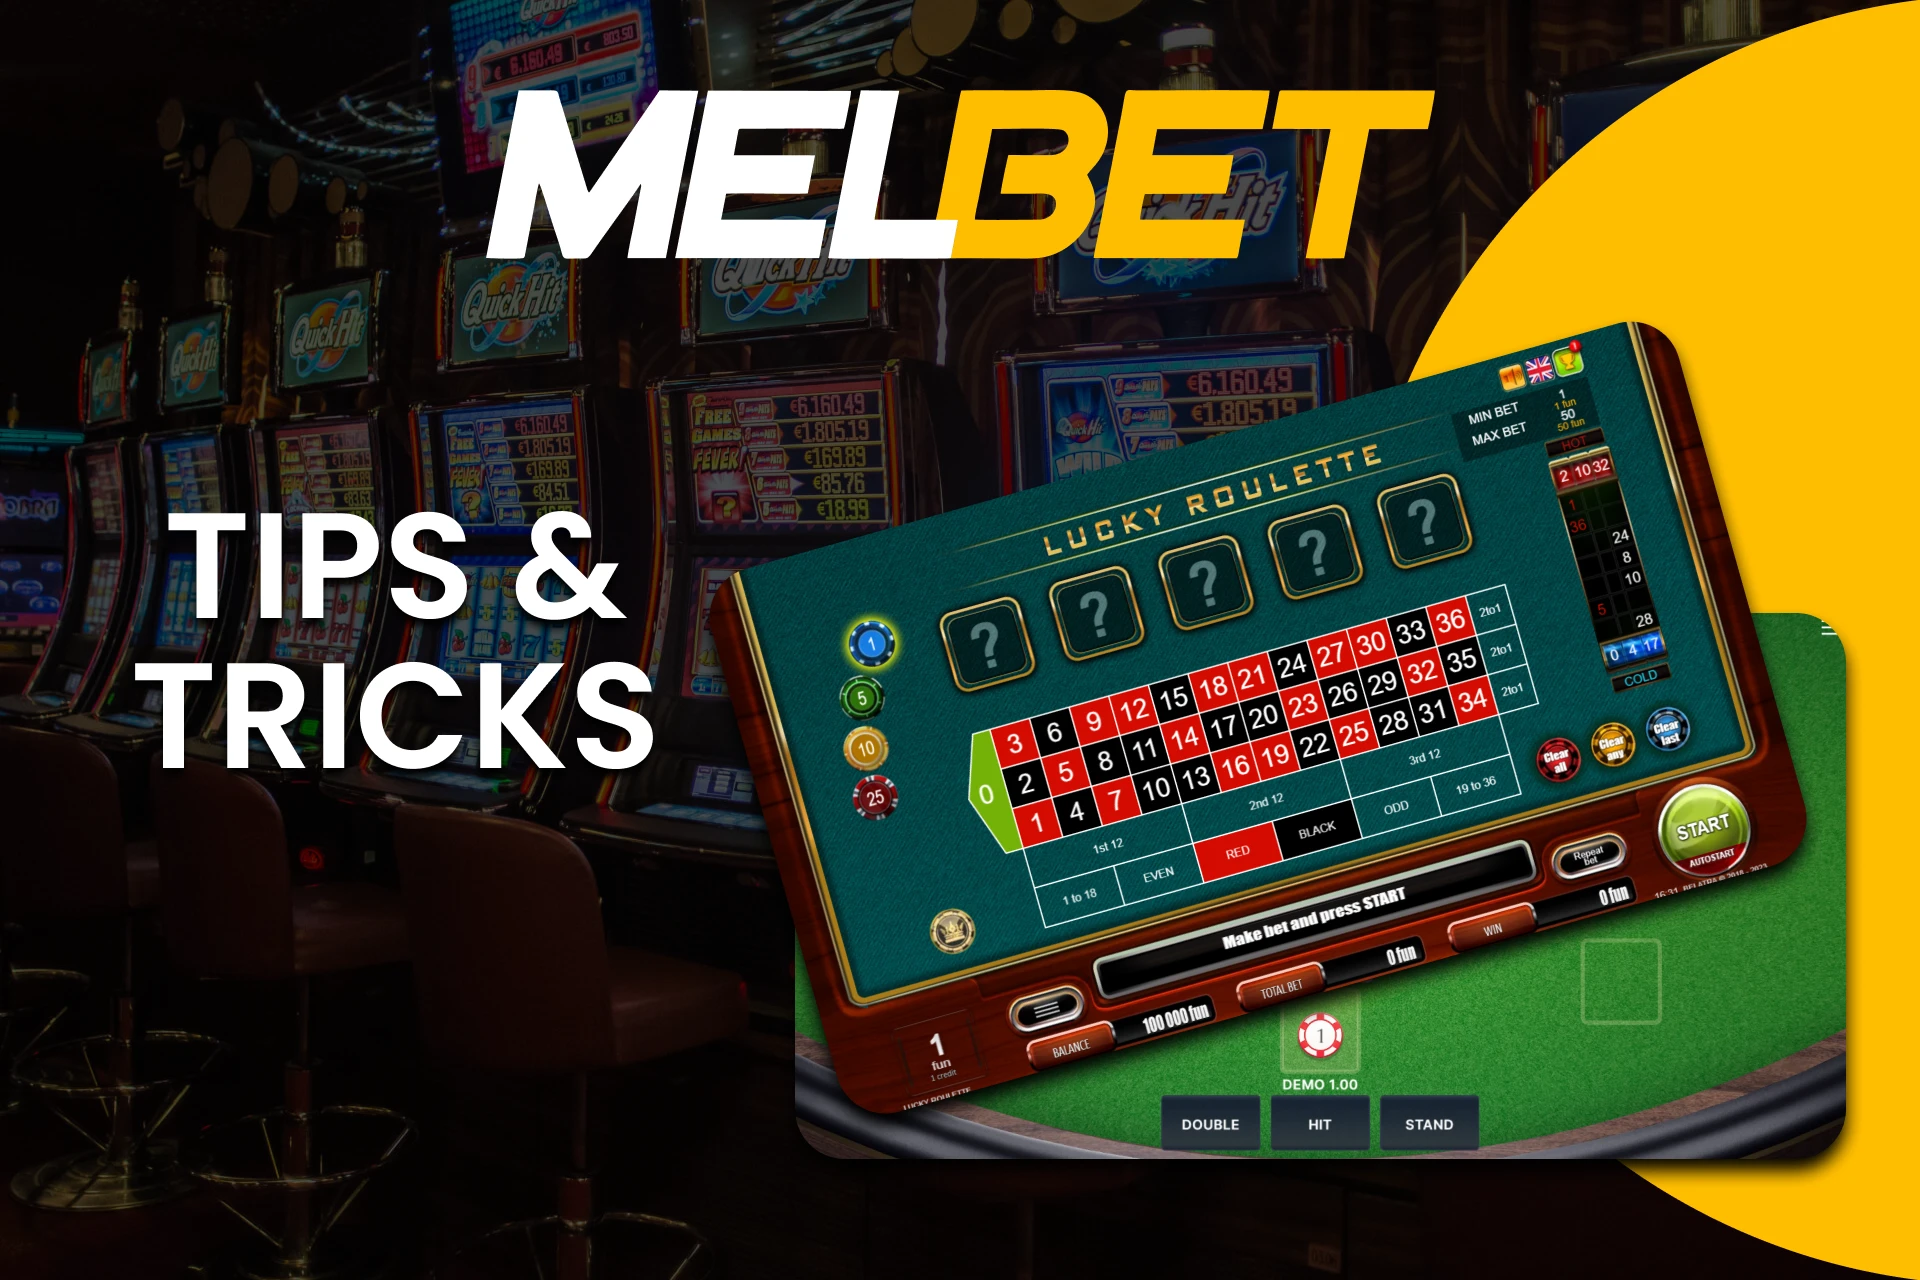 Check out tips from other Jackpot players on Melbet.